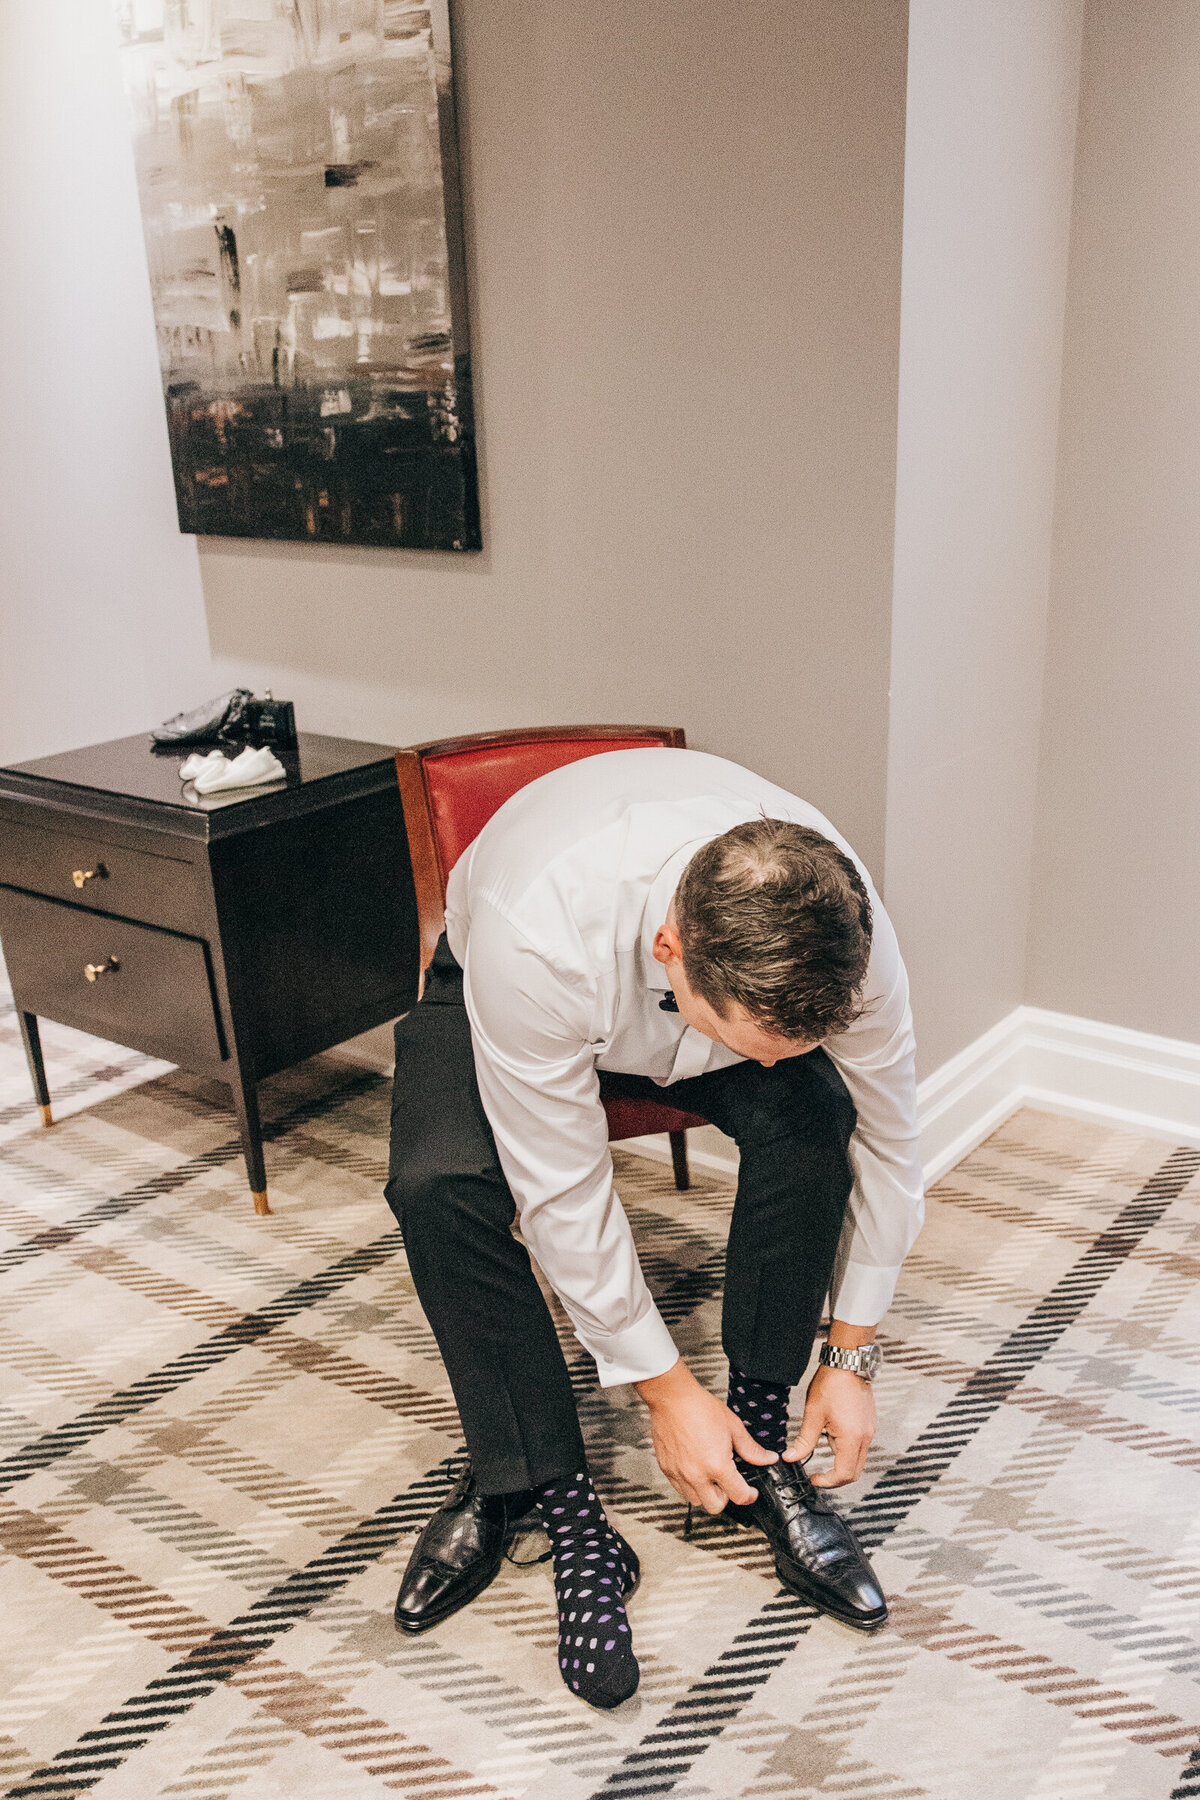 A groom tying his wedding day shoes